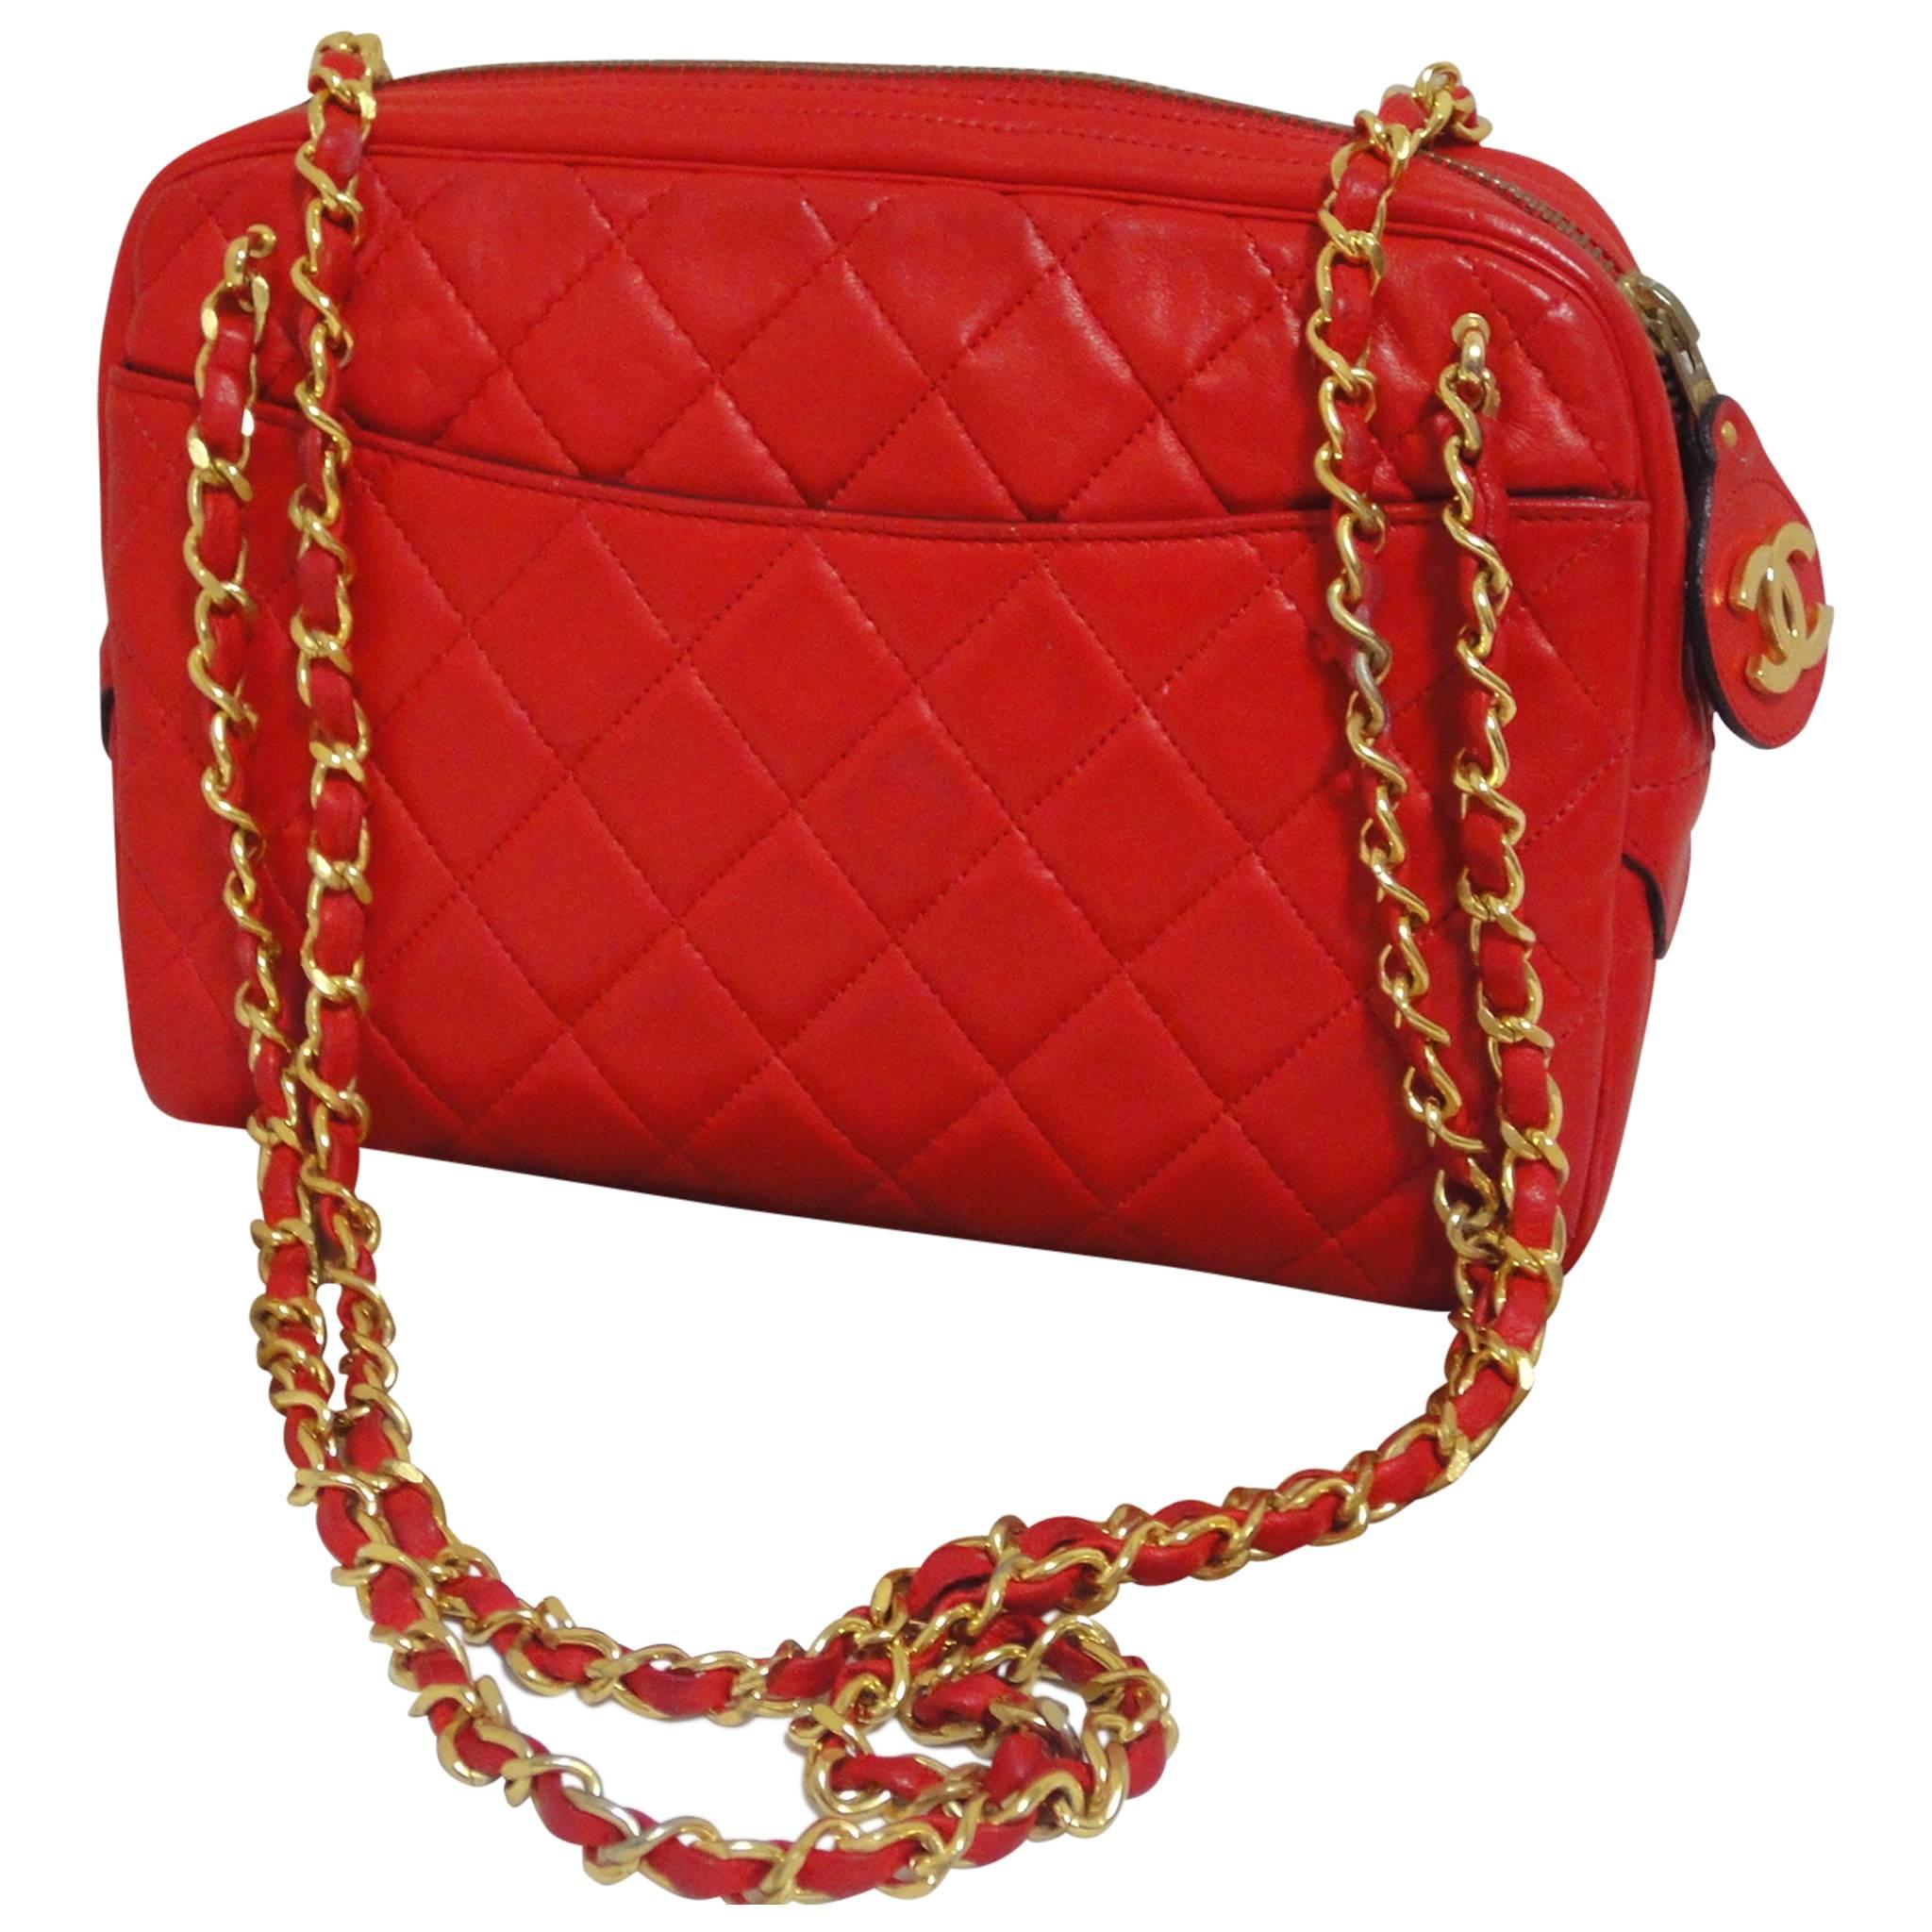 80's Vintage CHANEL red lambskin classic shoulder purse with double golden chain